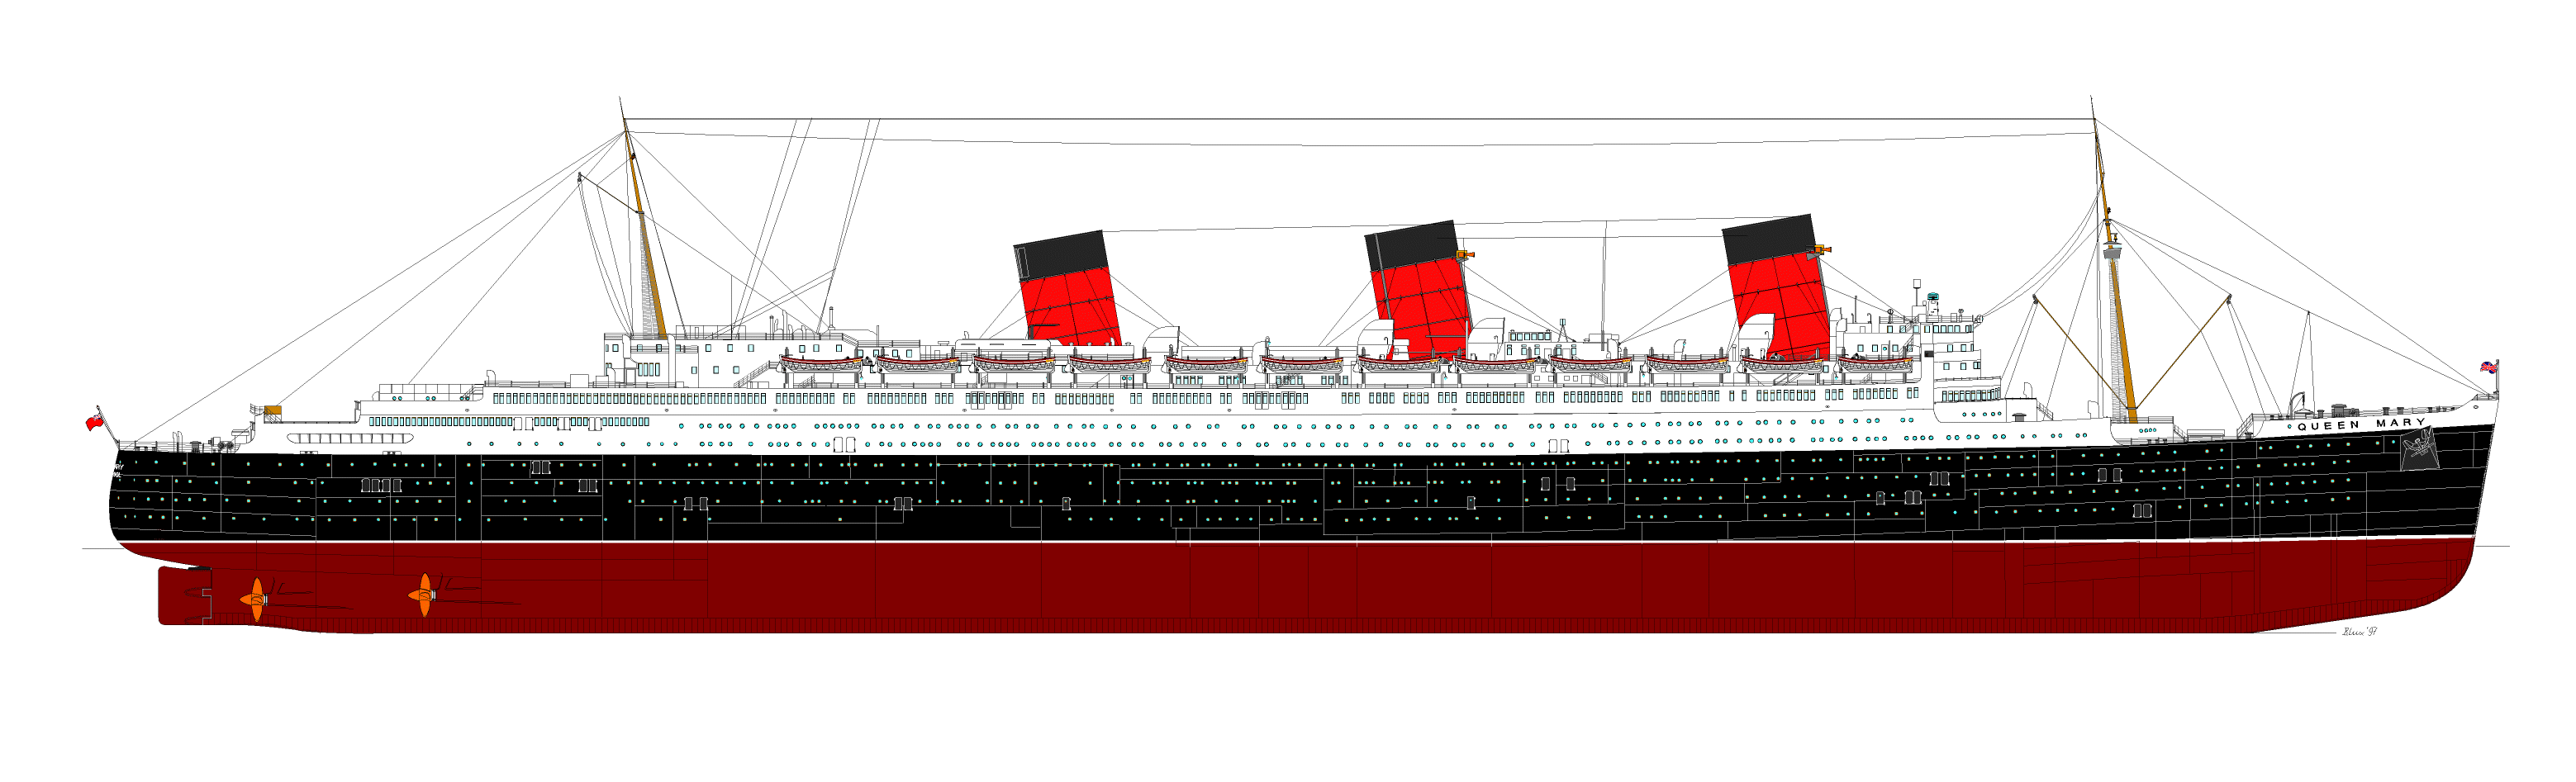 Lux's type collection - Ocean liners - QUEEN MARY - 1936